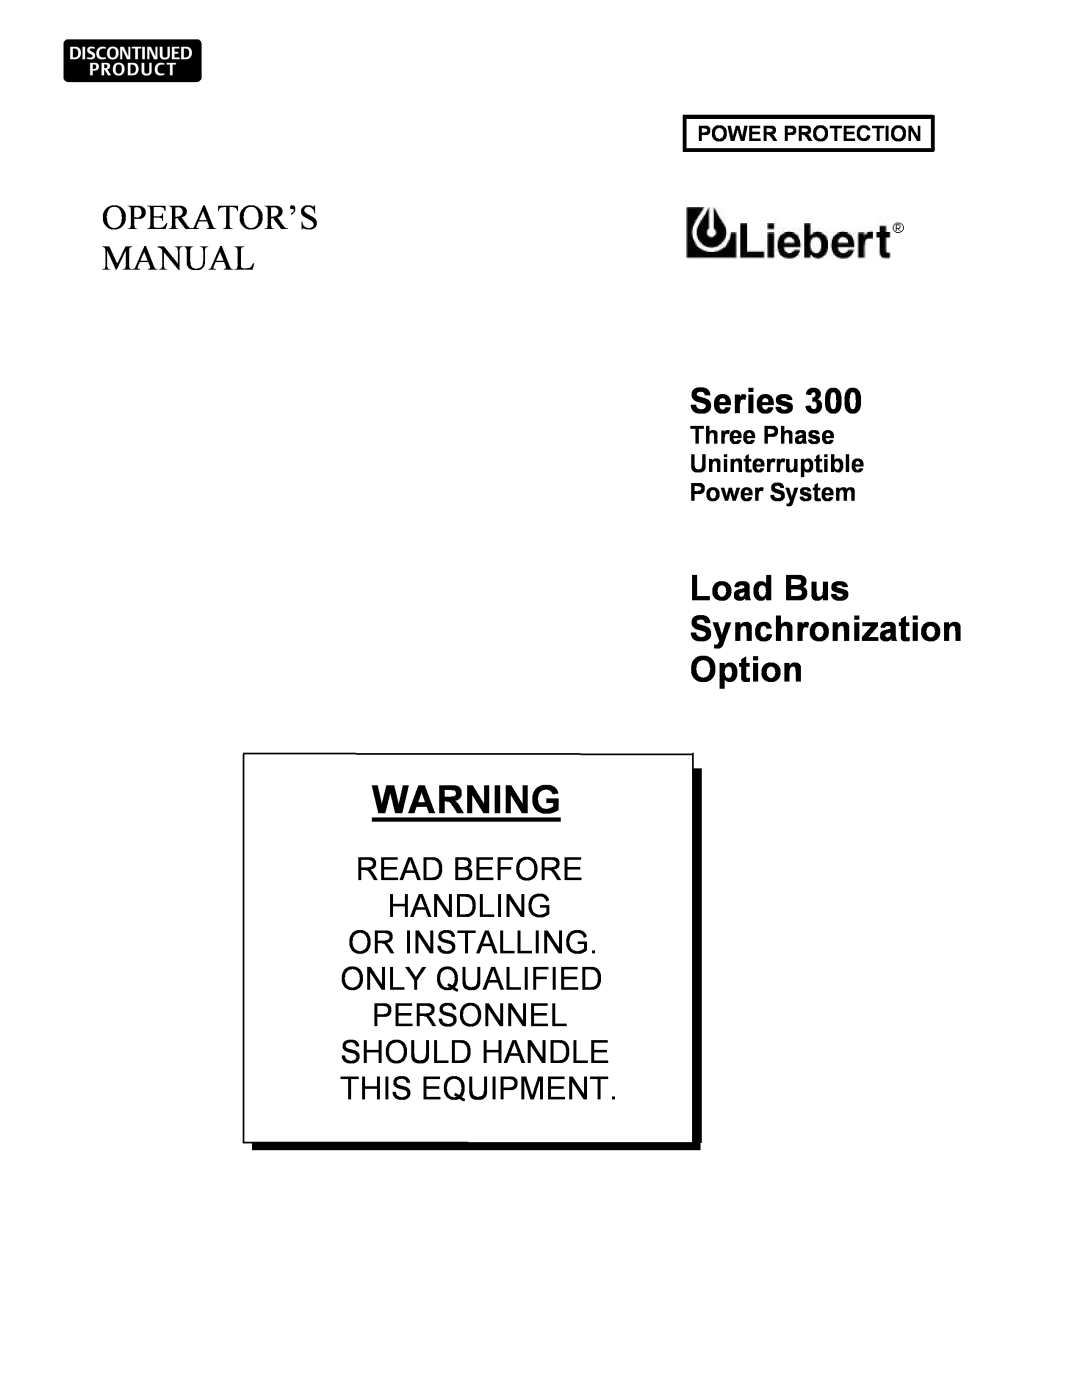 Liebert 300 manual Operator’S Manual, Series, Load Bus Synchronization Option, Personnel Should Handle This Equipment 